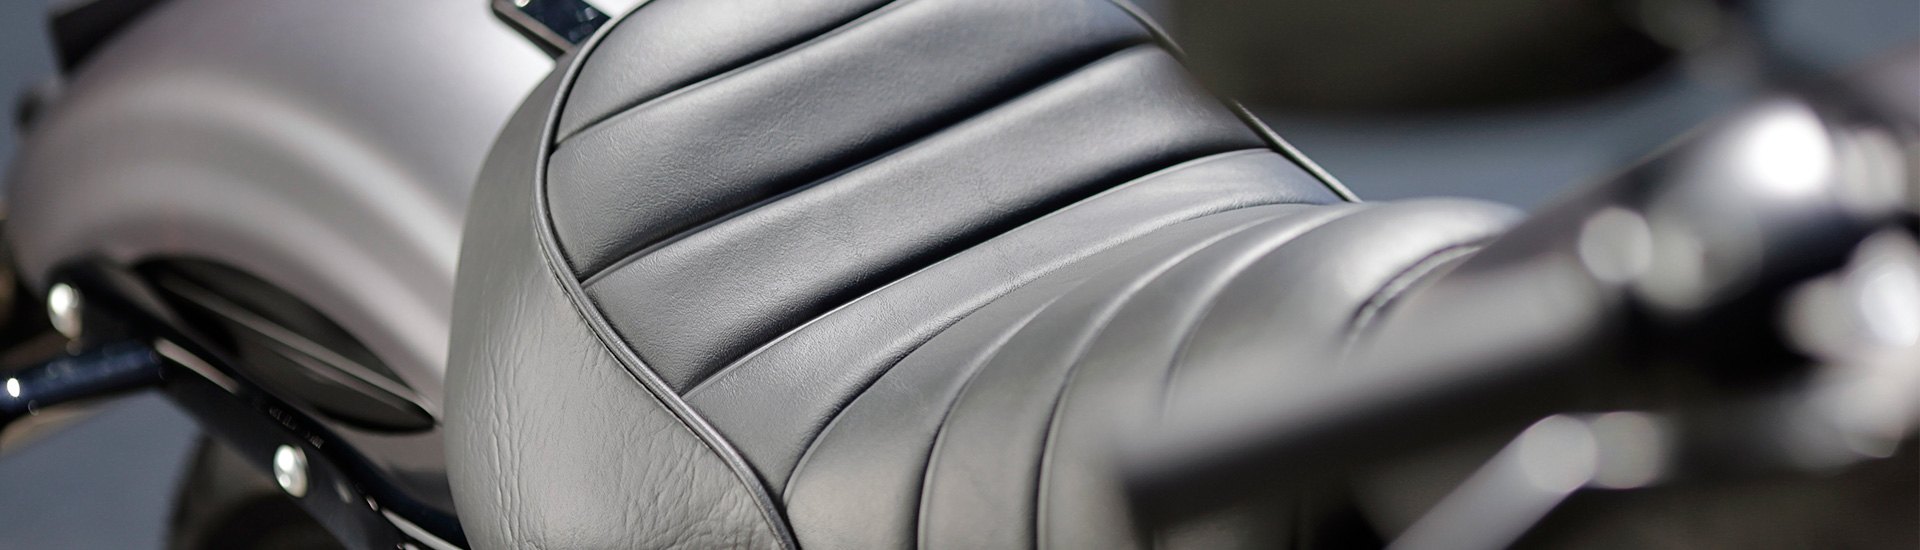 Universal Motorcycle Seats & Seat Covers